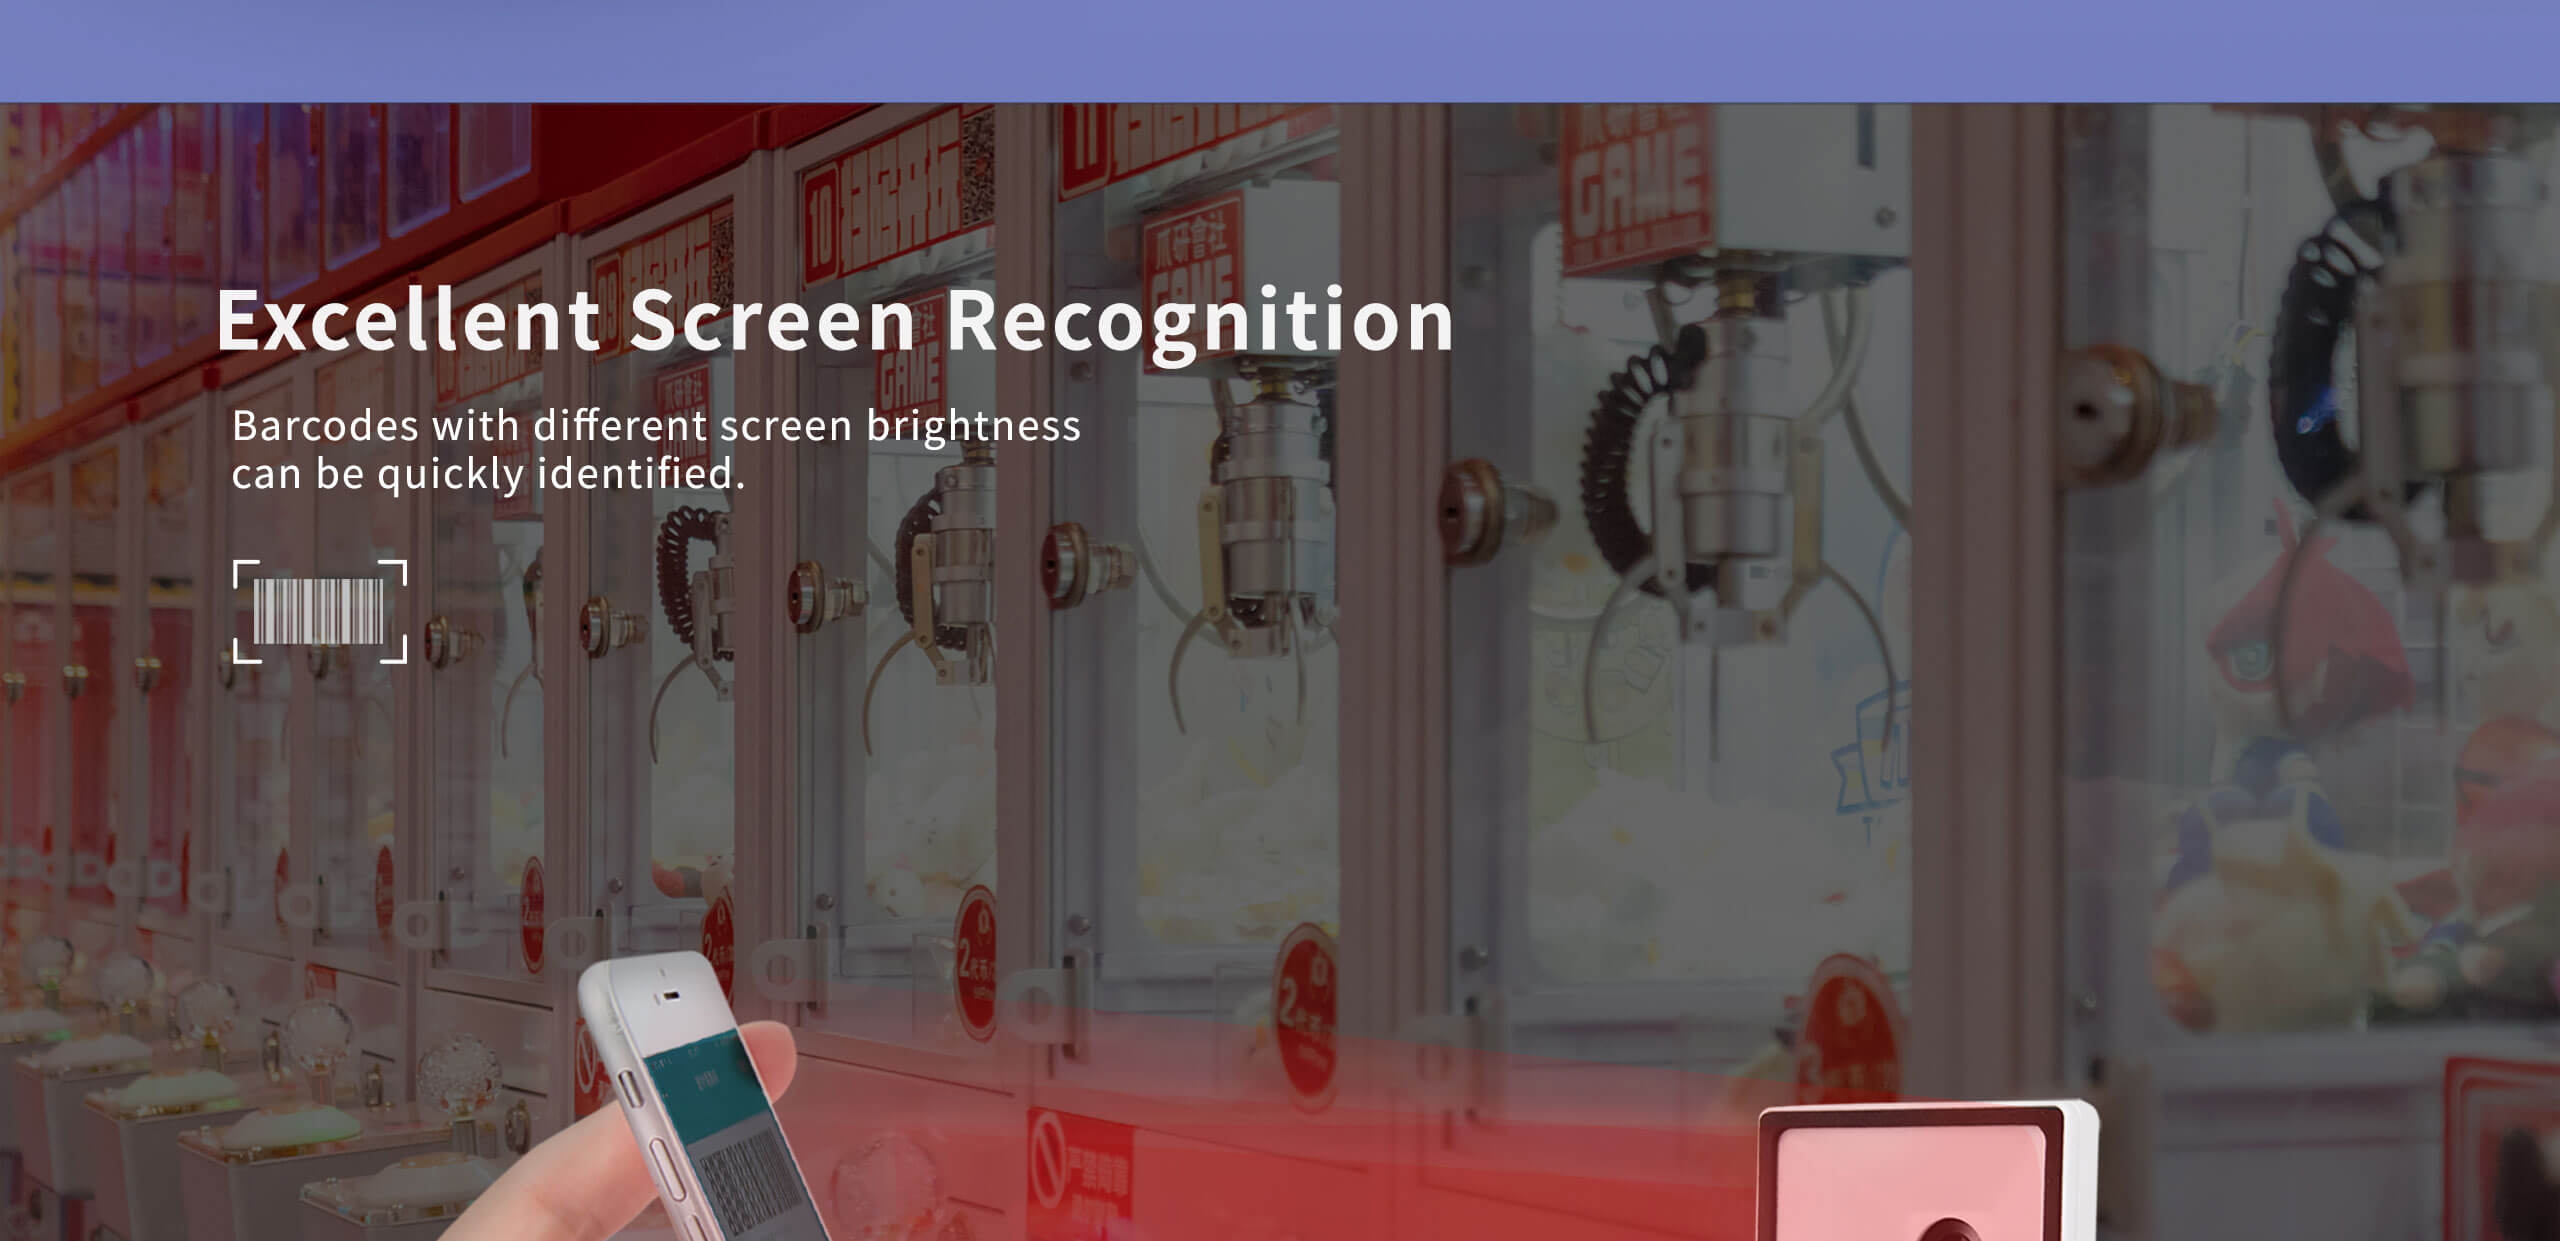 excellent screen recognition barcode scanner.jpg